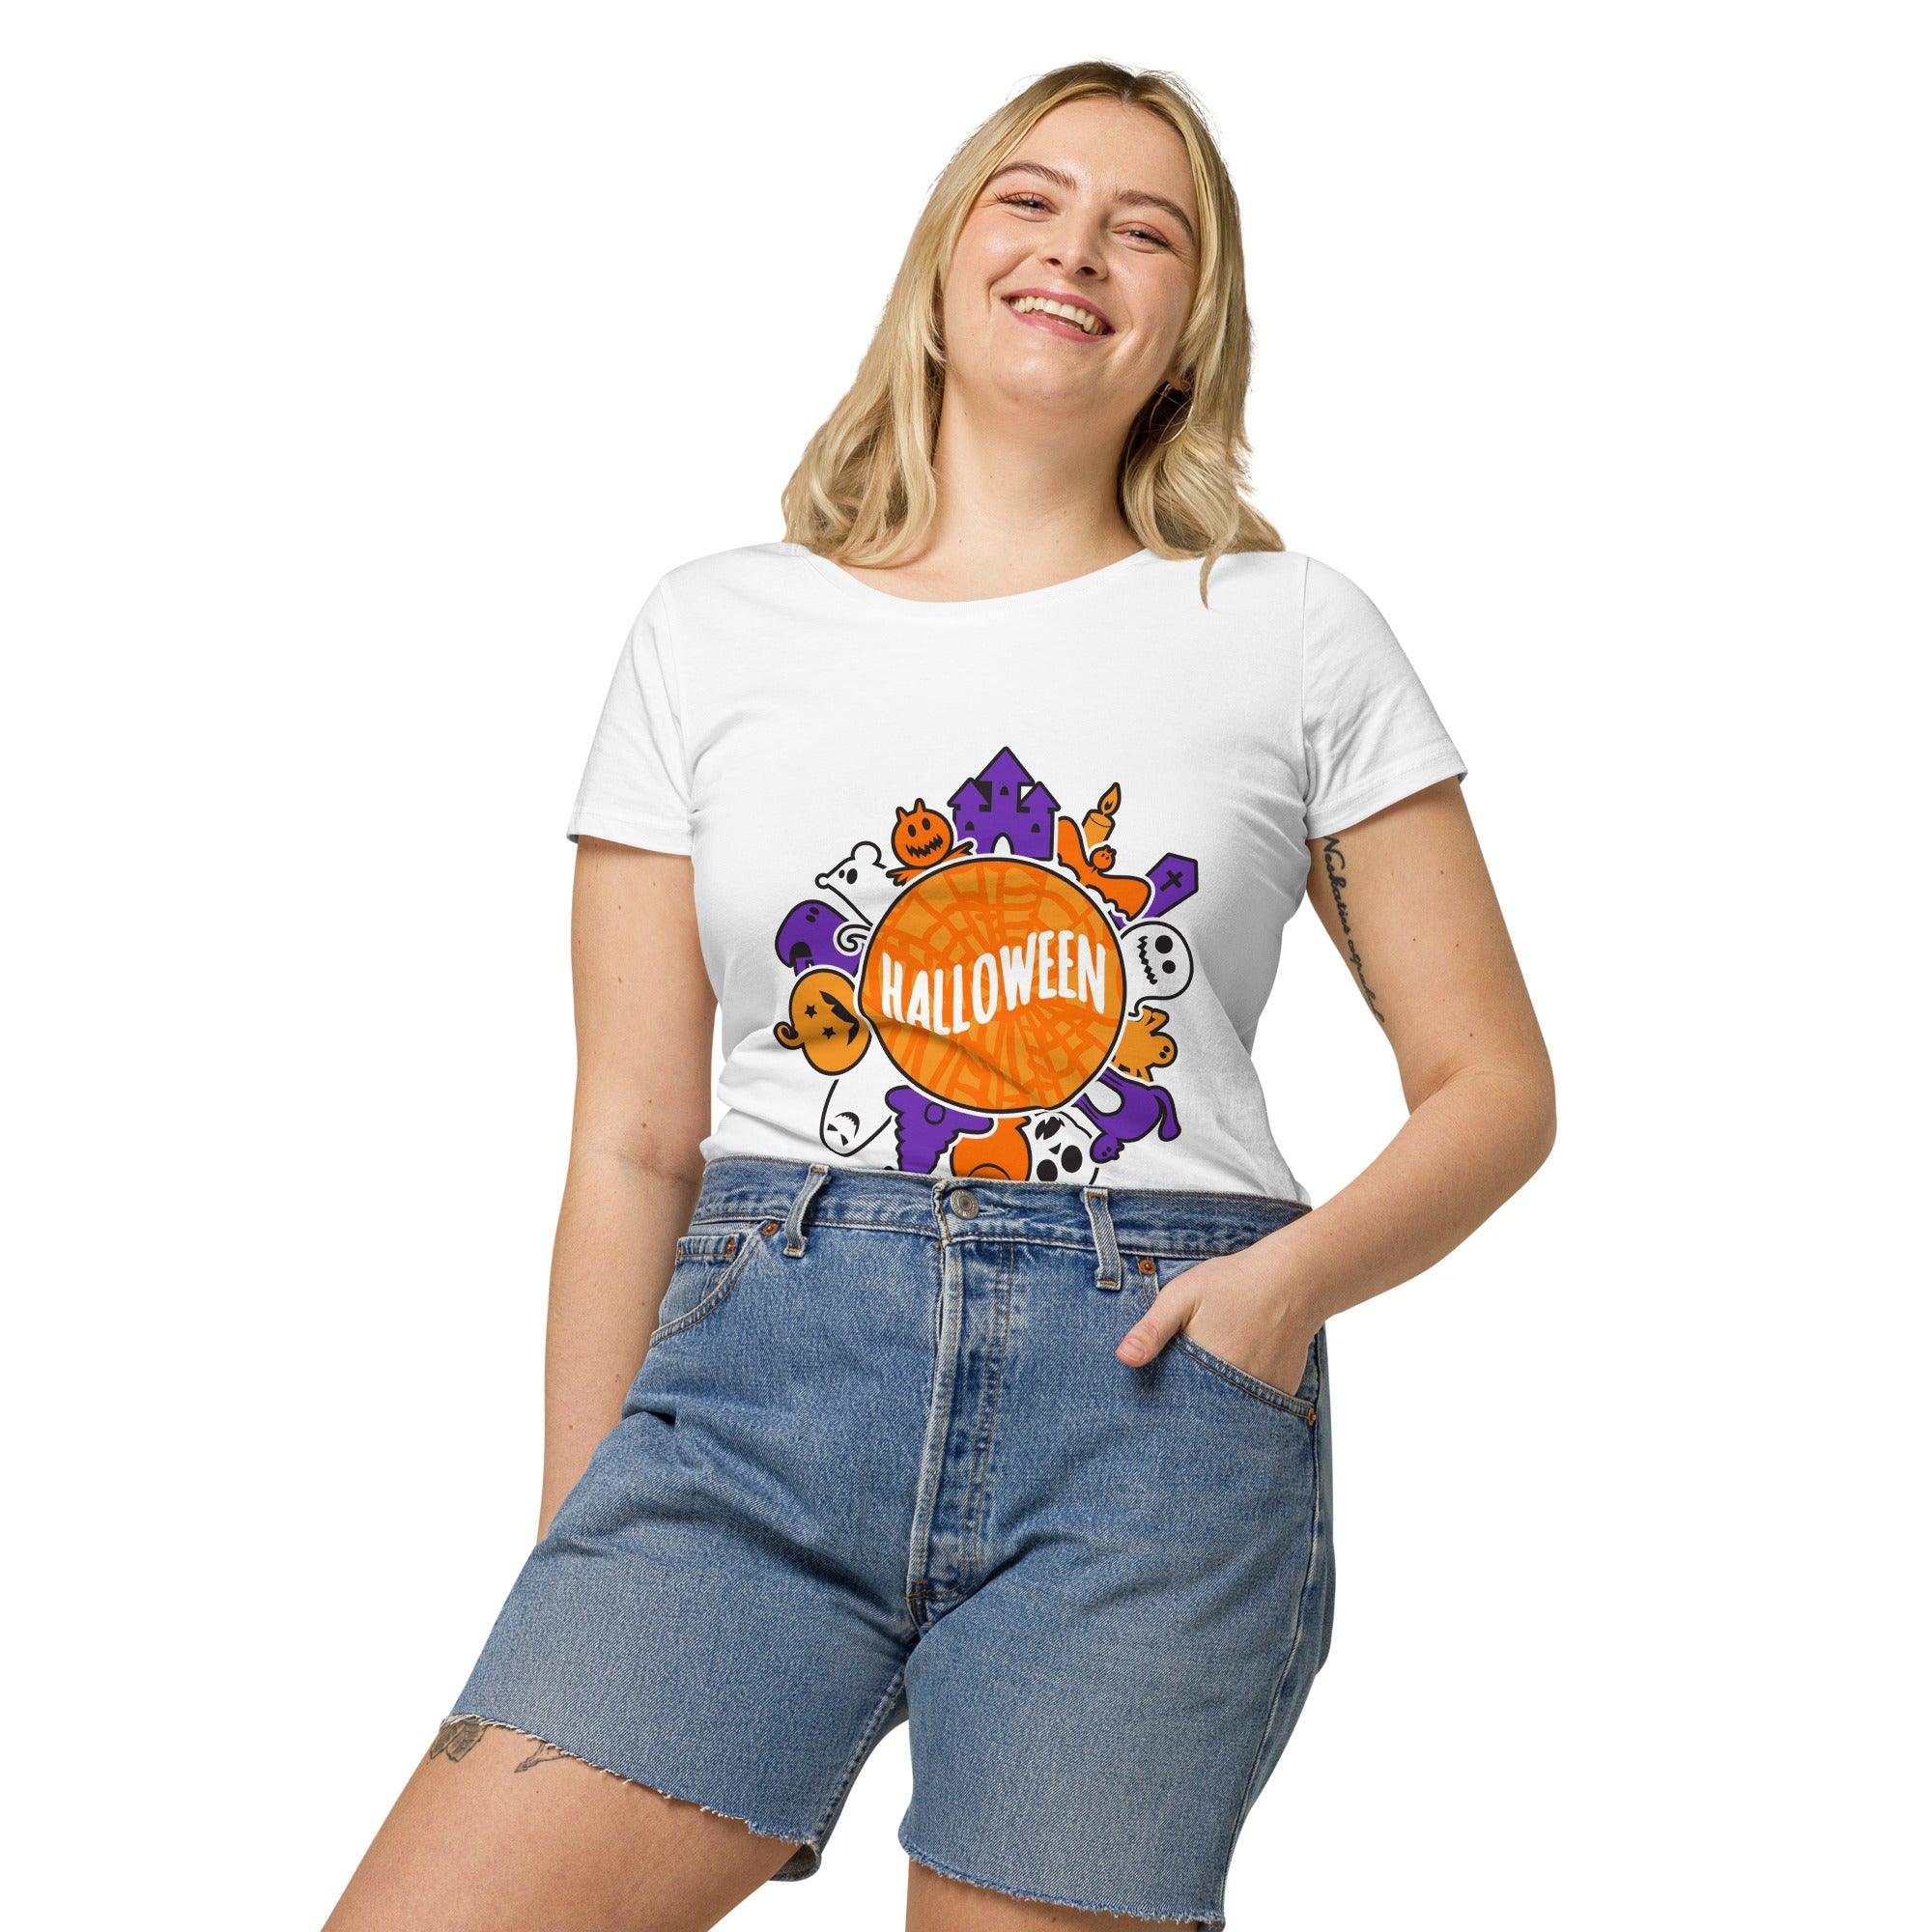 Styling the Organic Halloween T-Shirt with a Halloween-themed outfit, demonstrating its versatility and stylish appeal.